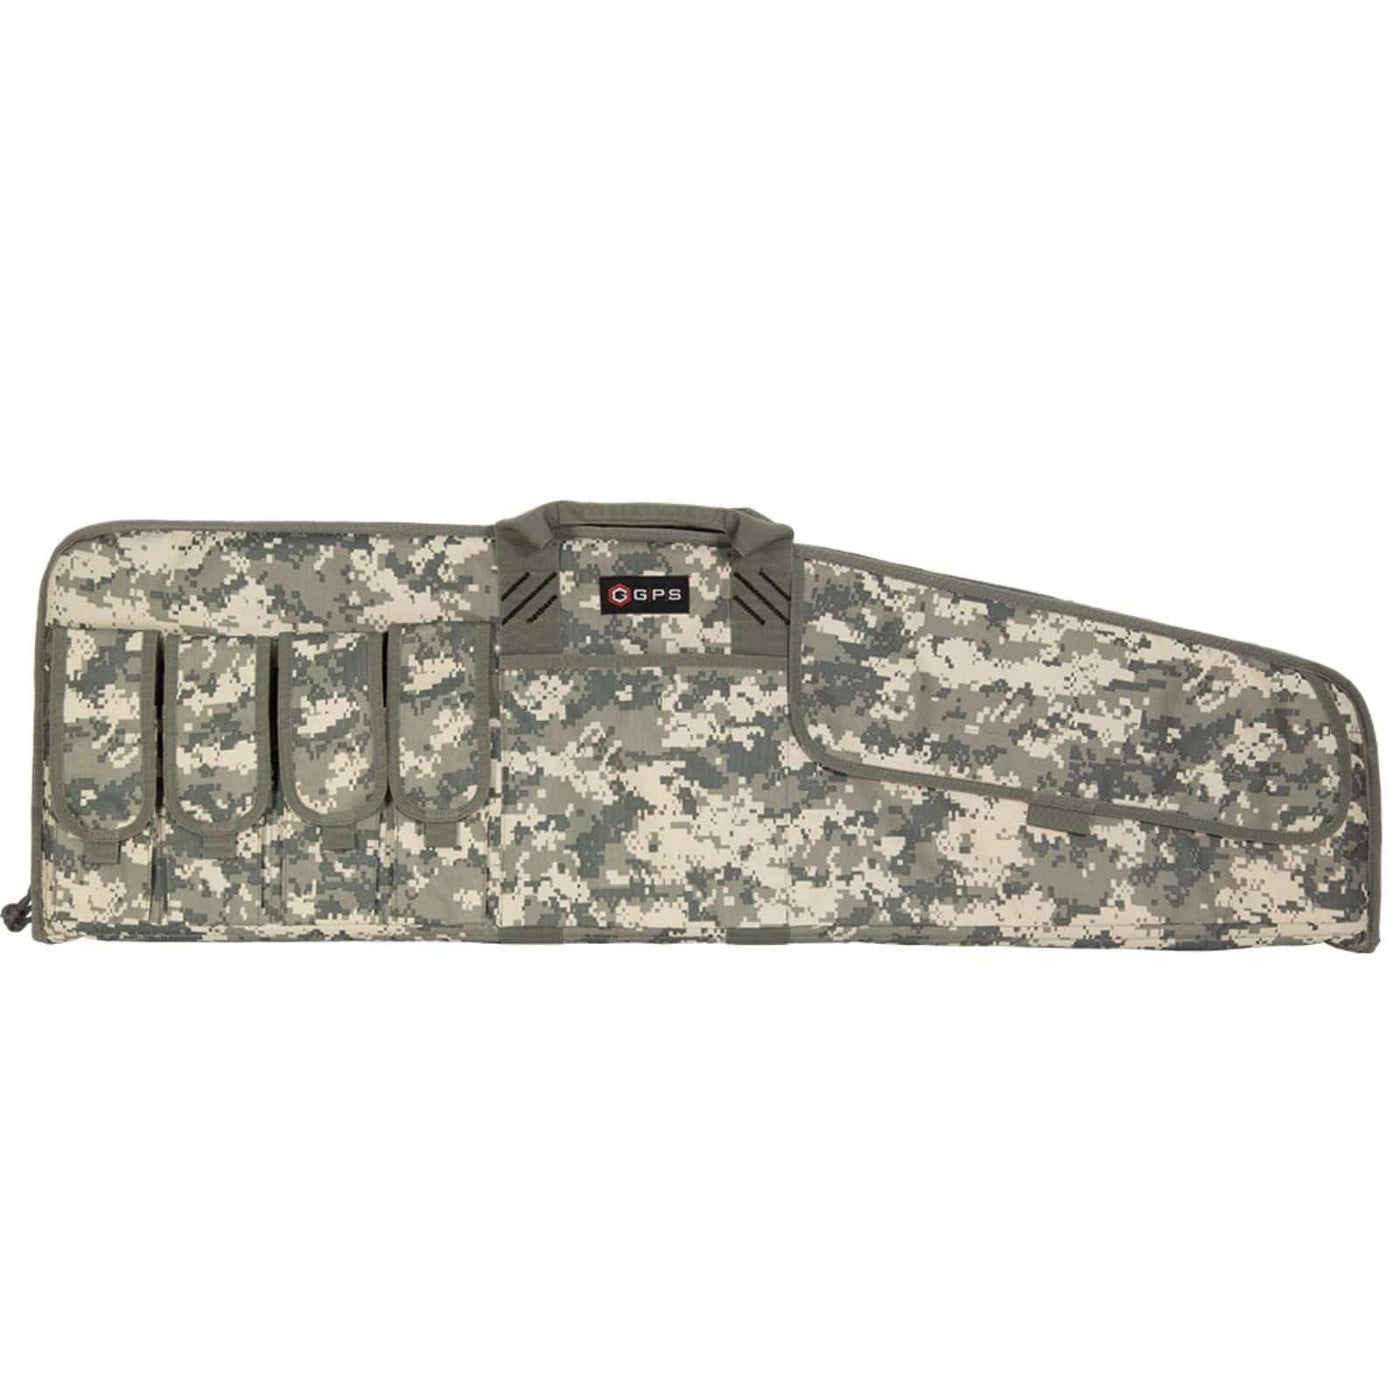 G*Outdoors G*outdoors Single Rifle Case, Gps Gps-src42-acu 42" Single Rifle Case - Acu Camo ACU Camo Firearm Accessories